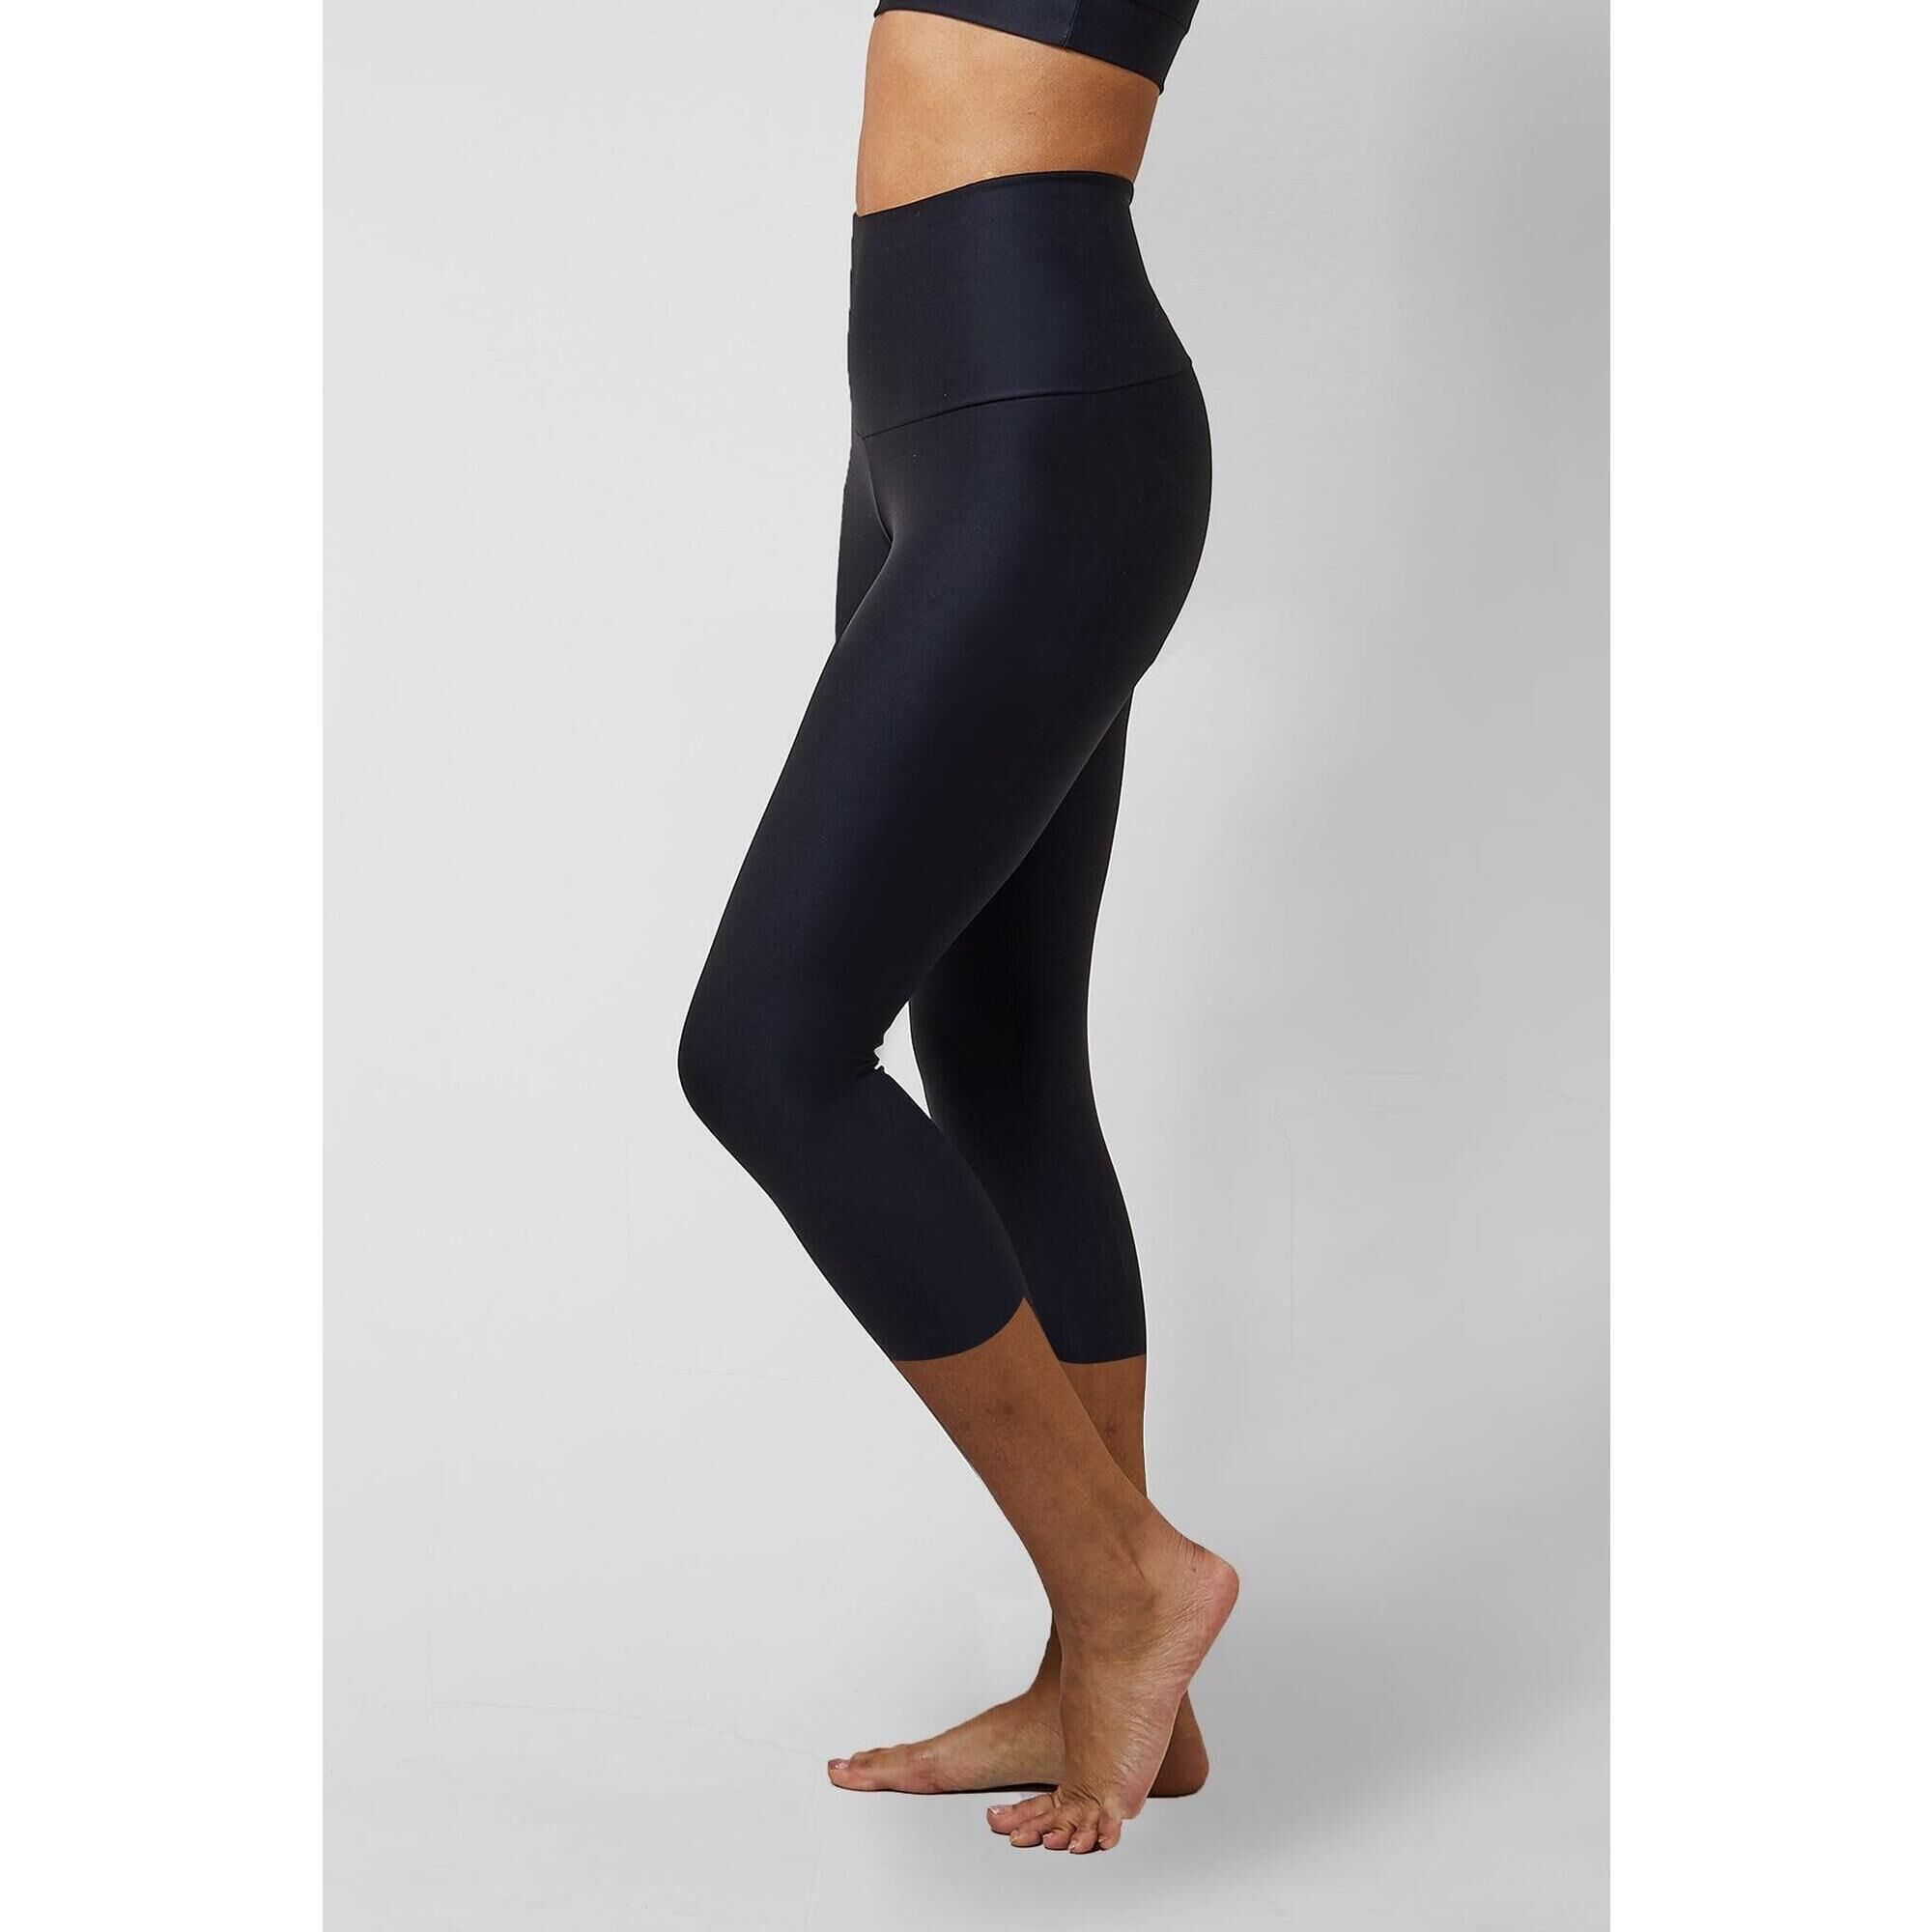 TLC SPORT Extra Strong Compression Running Cropped Leggings with Tummy Control Black